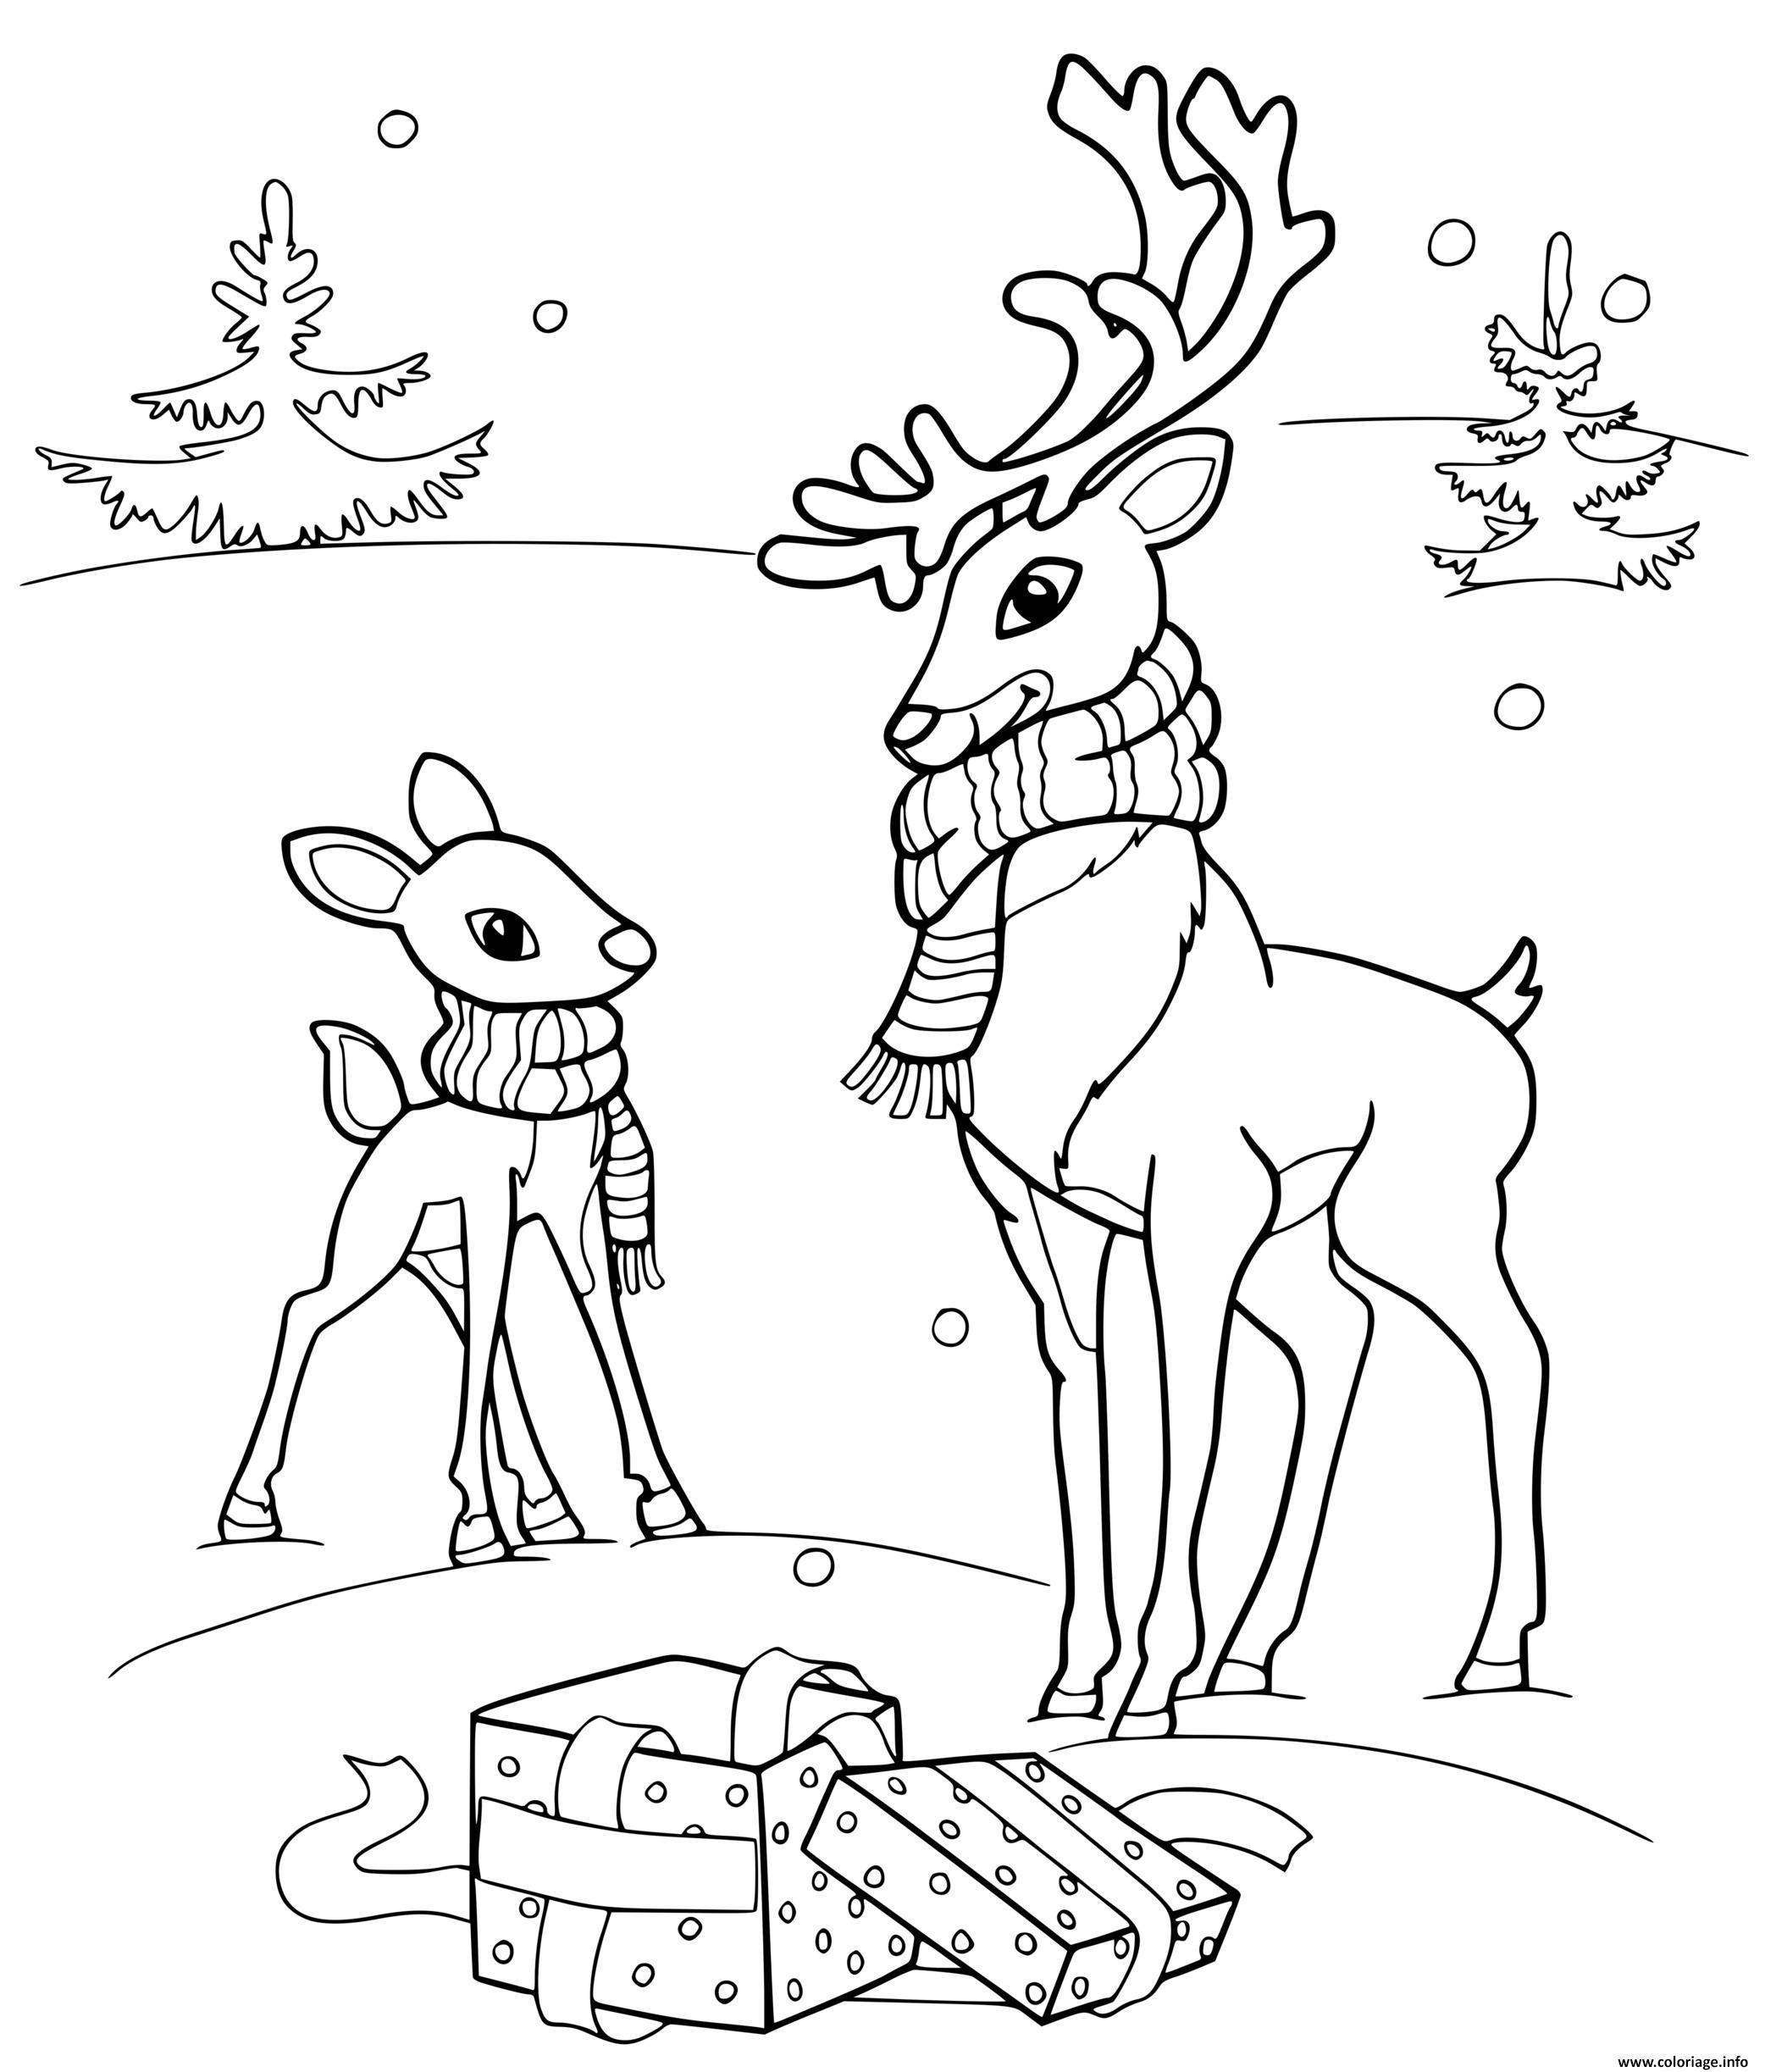 Coloriage Cerf Animaux Rennes Hiver Dessin Hiver À Imprimer tout Coloriage À Imprimer Animaux 